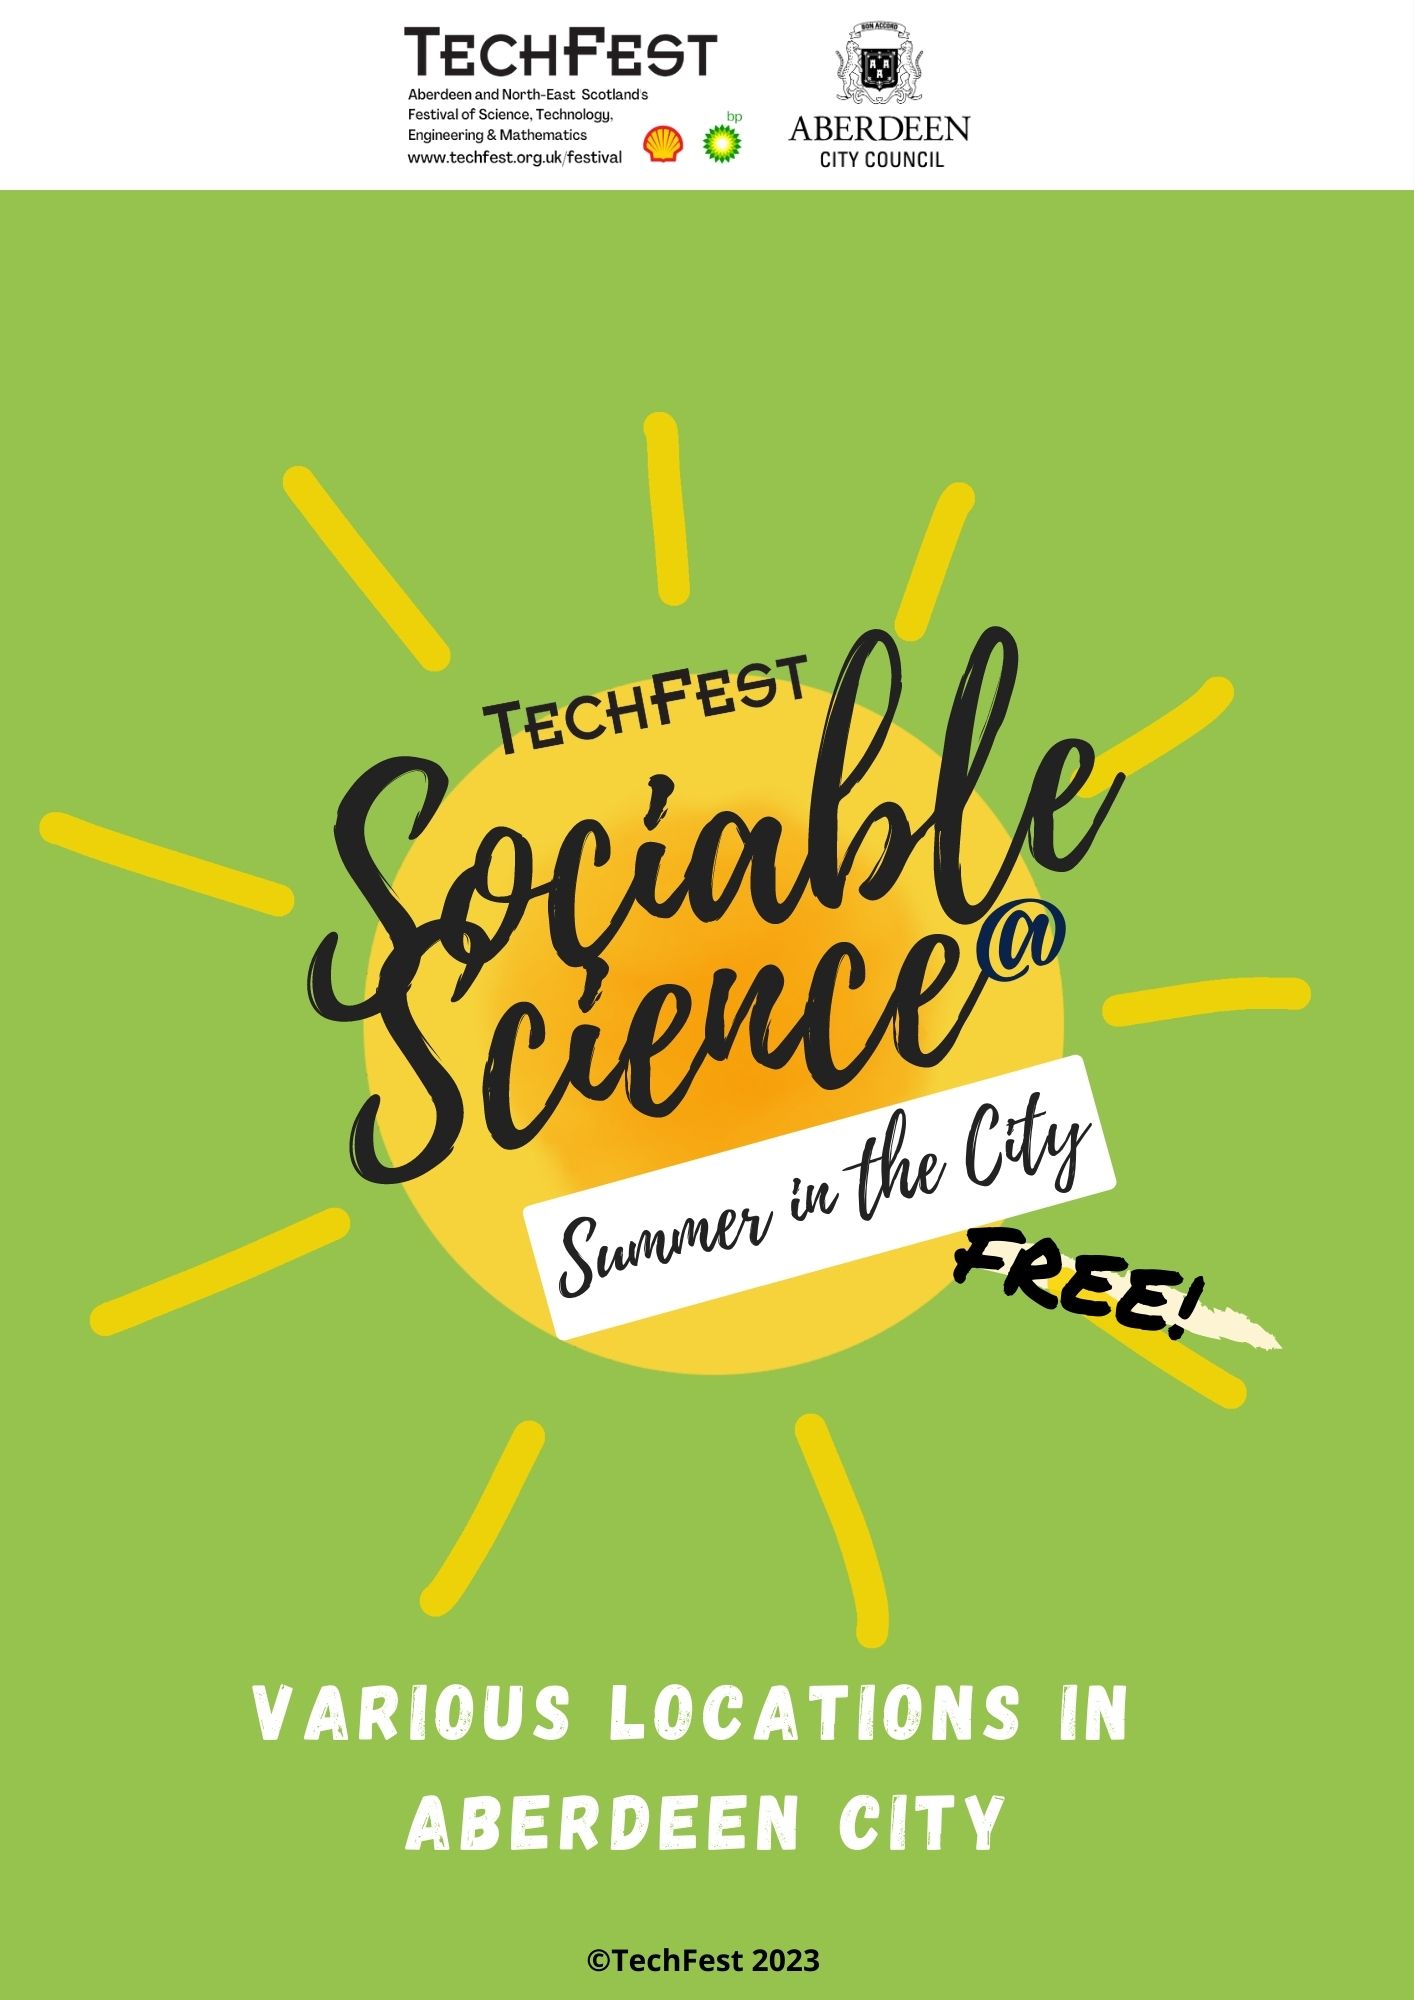 Sociable Science Cover Sheet Summer in the City 2023